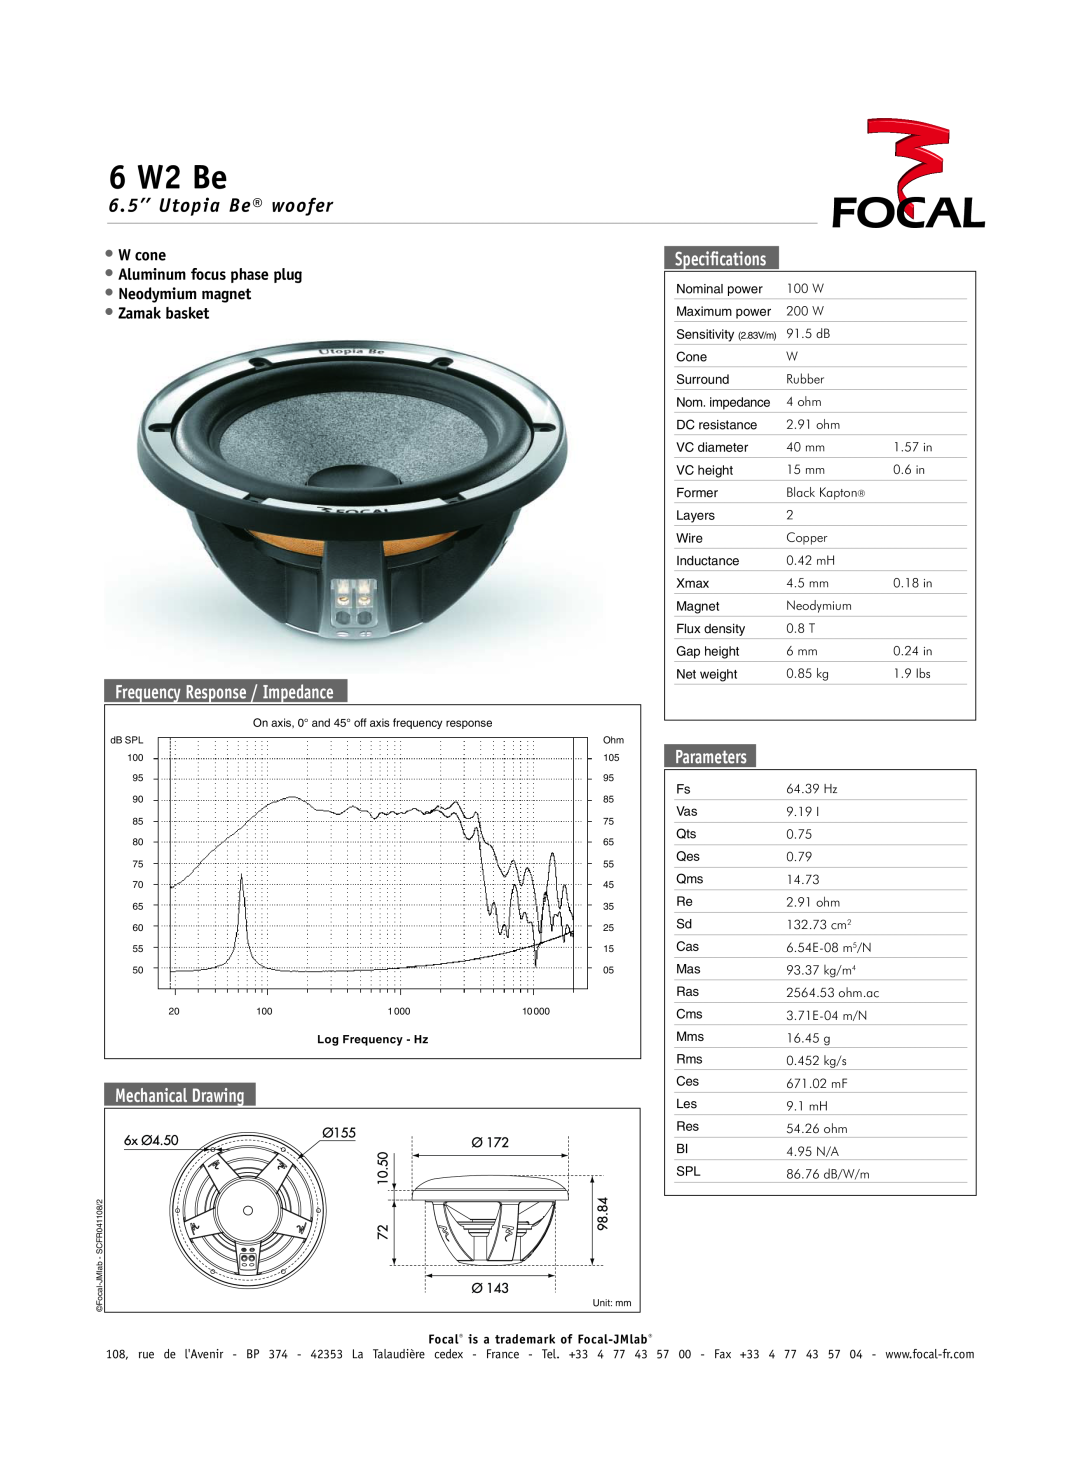 Focal 6 W2 Be specifications 6.5’’ Utopia Be woofer, Frequency Response / Impedance, Mechanical Drawing, Speciﬁcations 